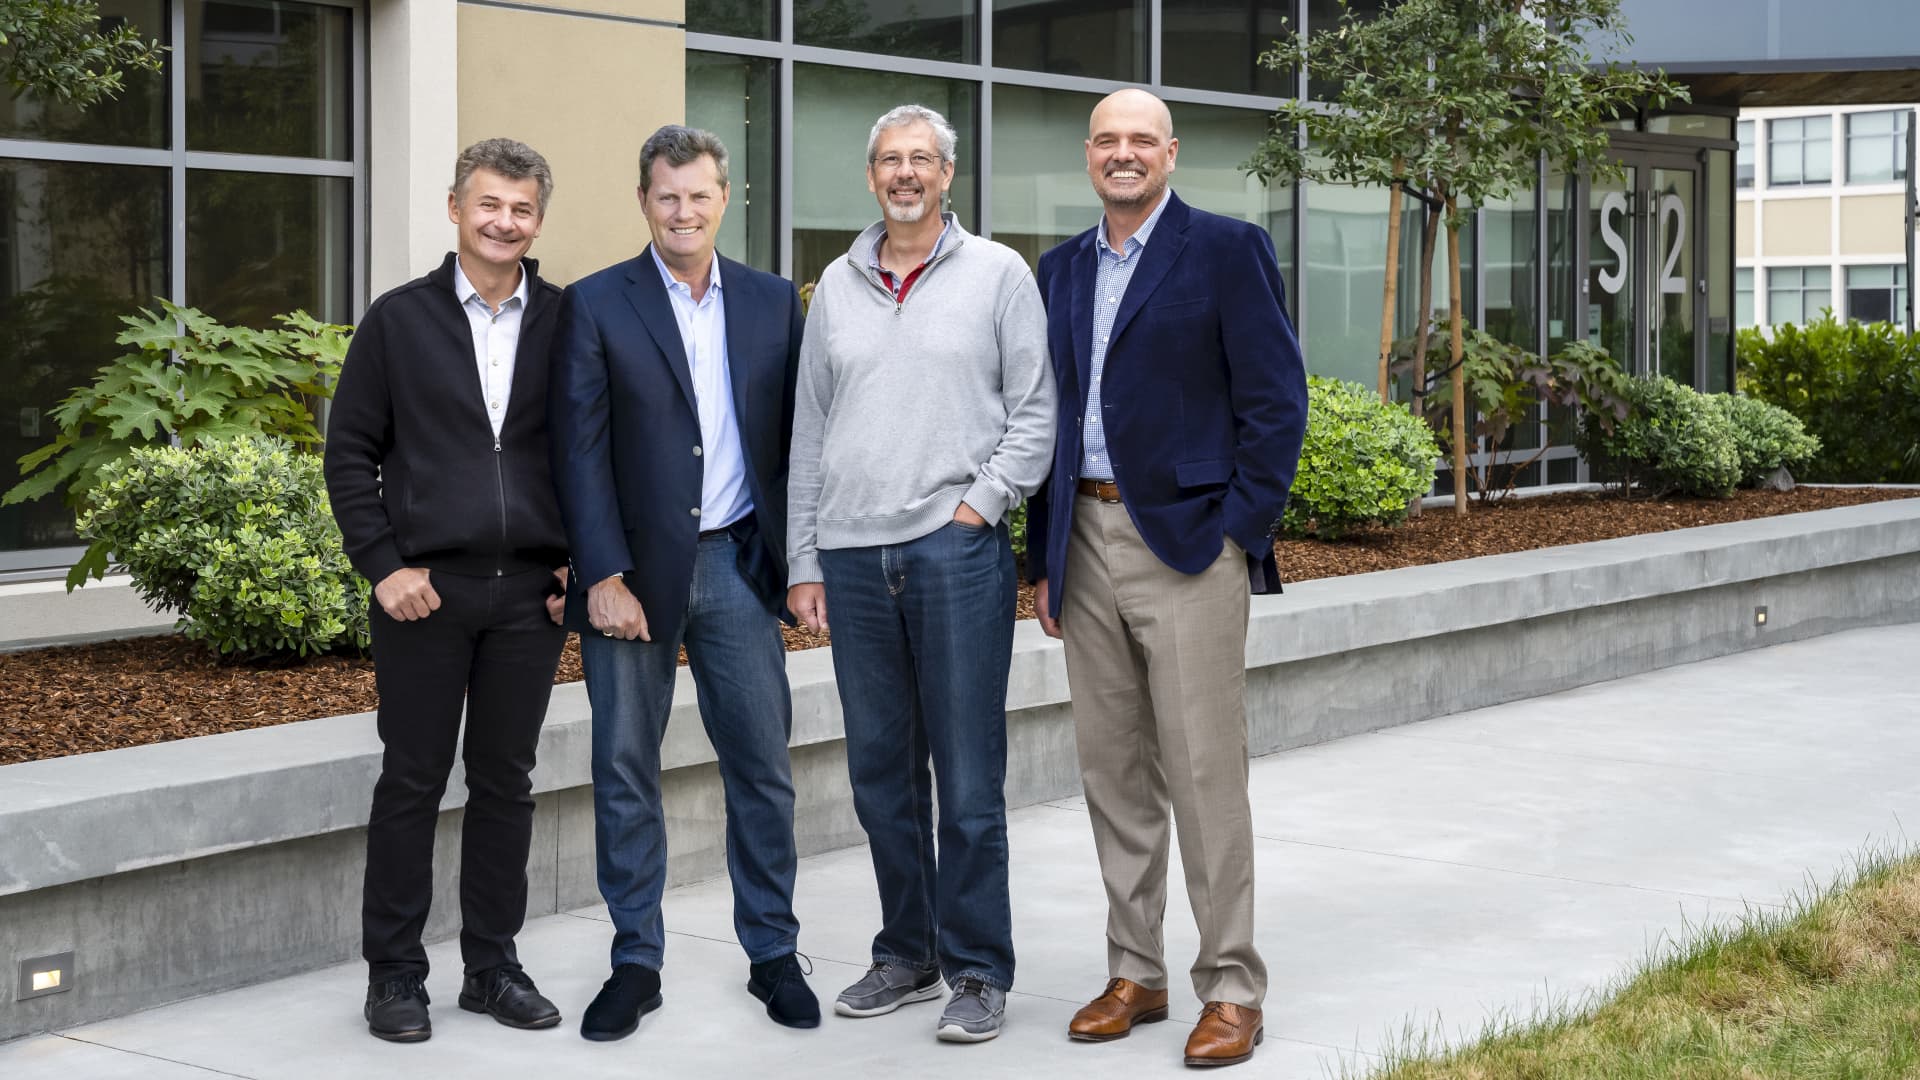 Snowflake execs from left to right: co-founder Benoit Dageville, CEO Frank Slootman, co-founder Thierry Cruanes and CFO Mike Scarpelli